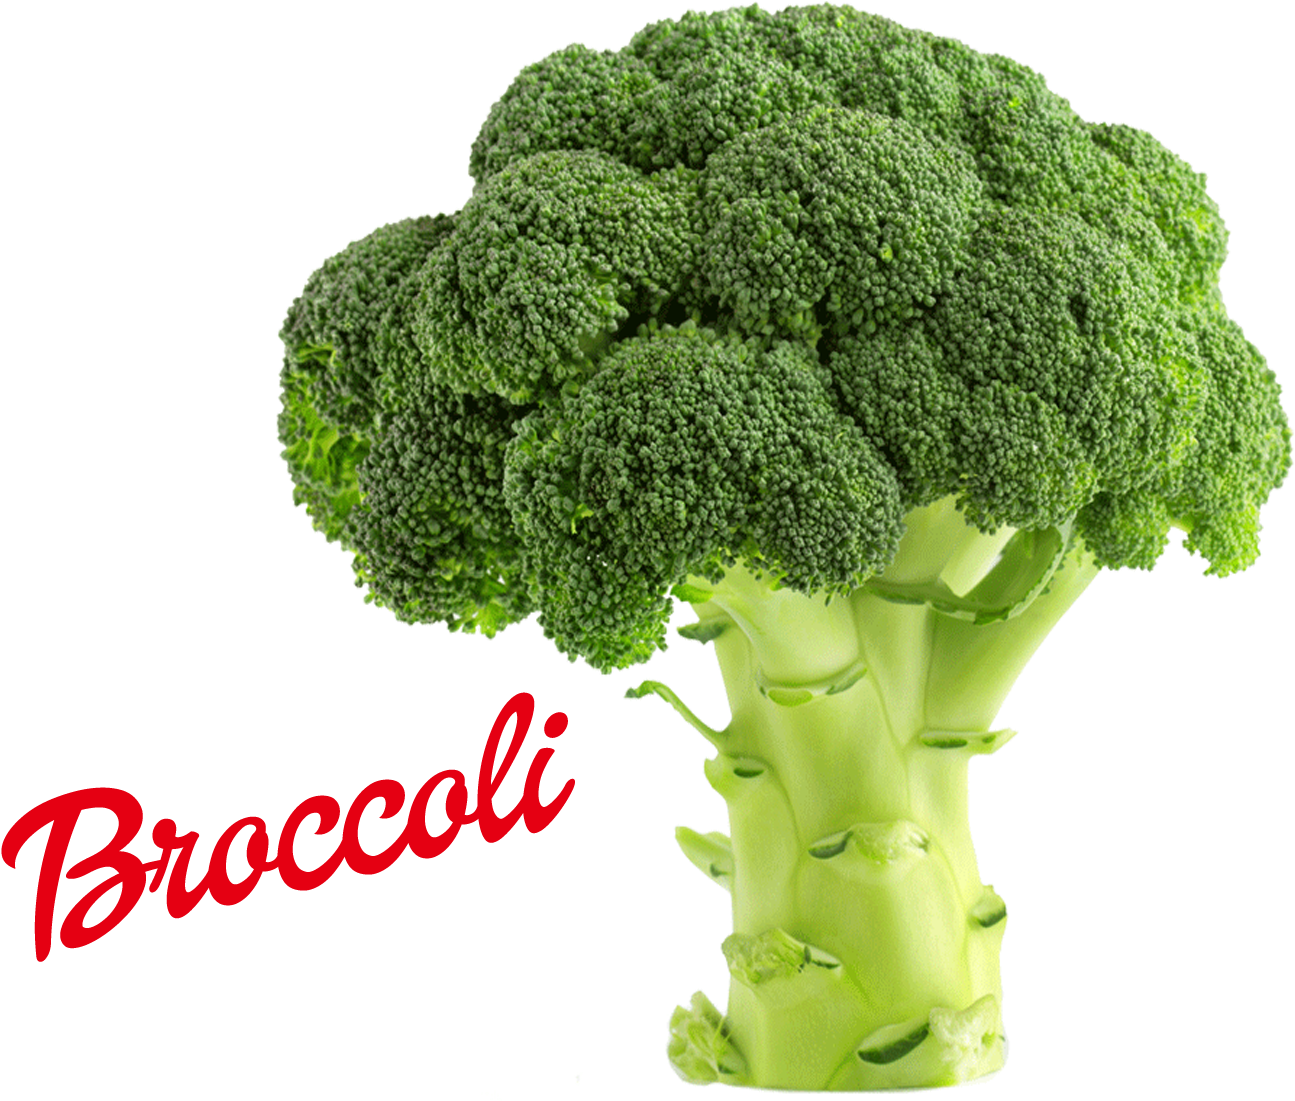 A Green Broccoli With A Black Background